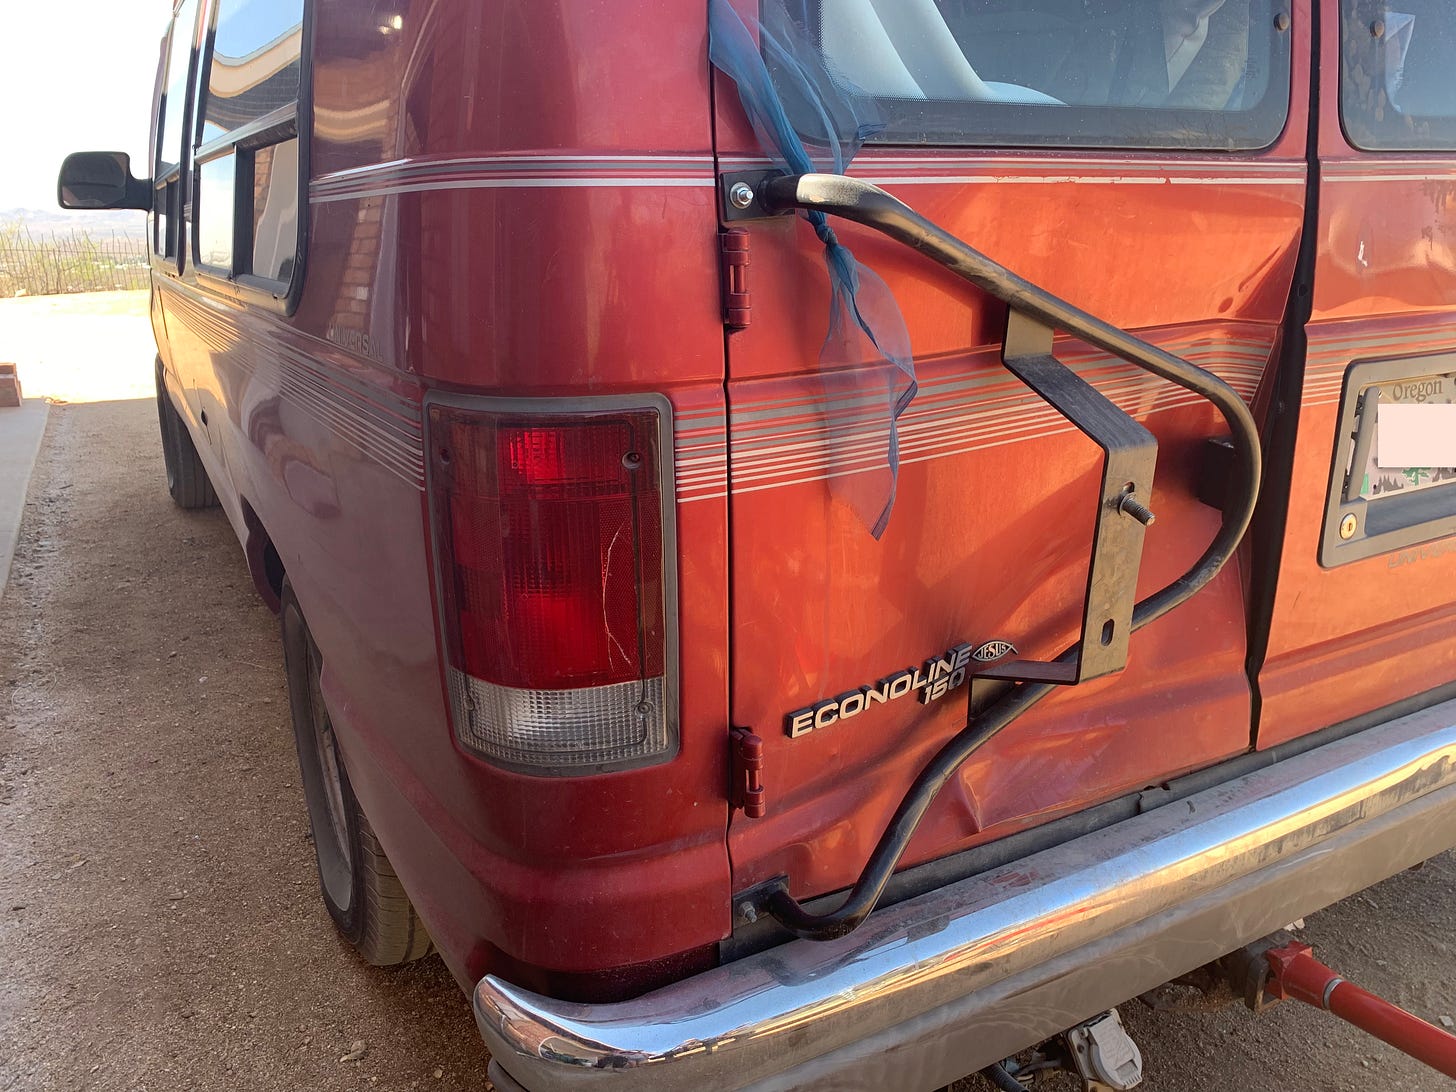 The back of the author's red Ford Econoline van, the passenger side of the door smashed in.